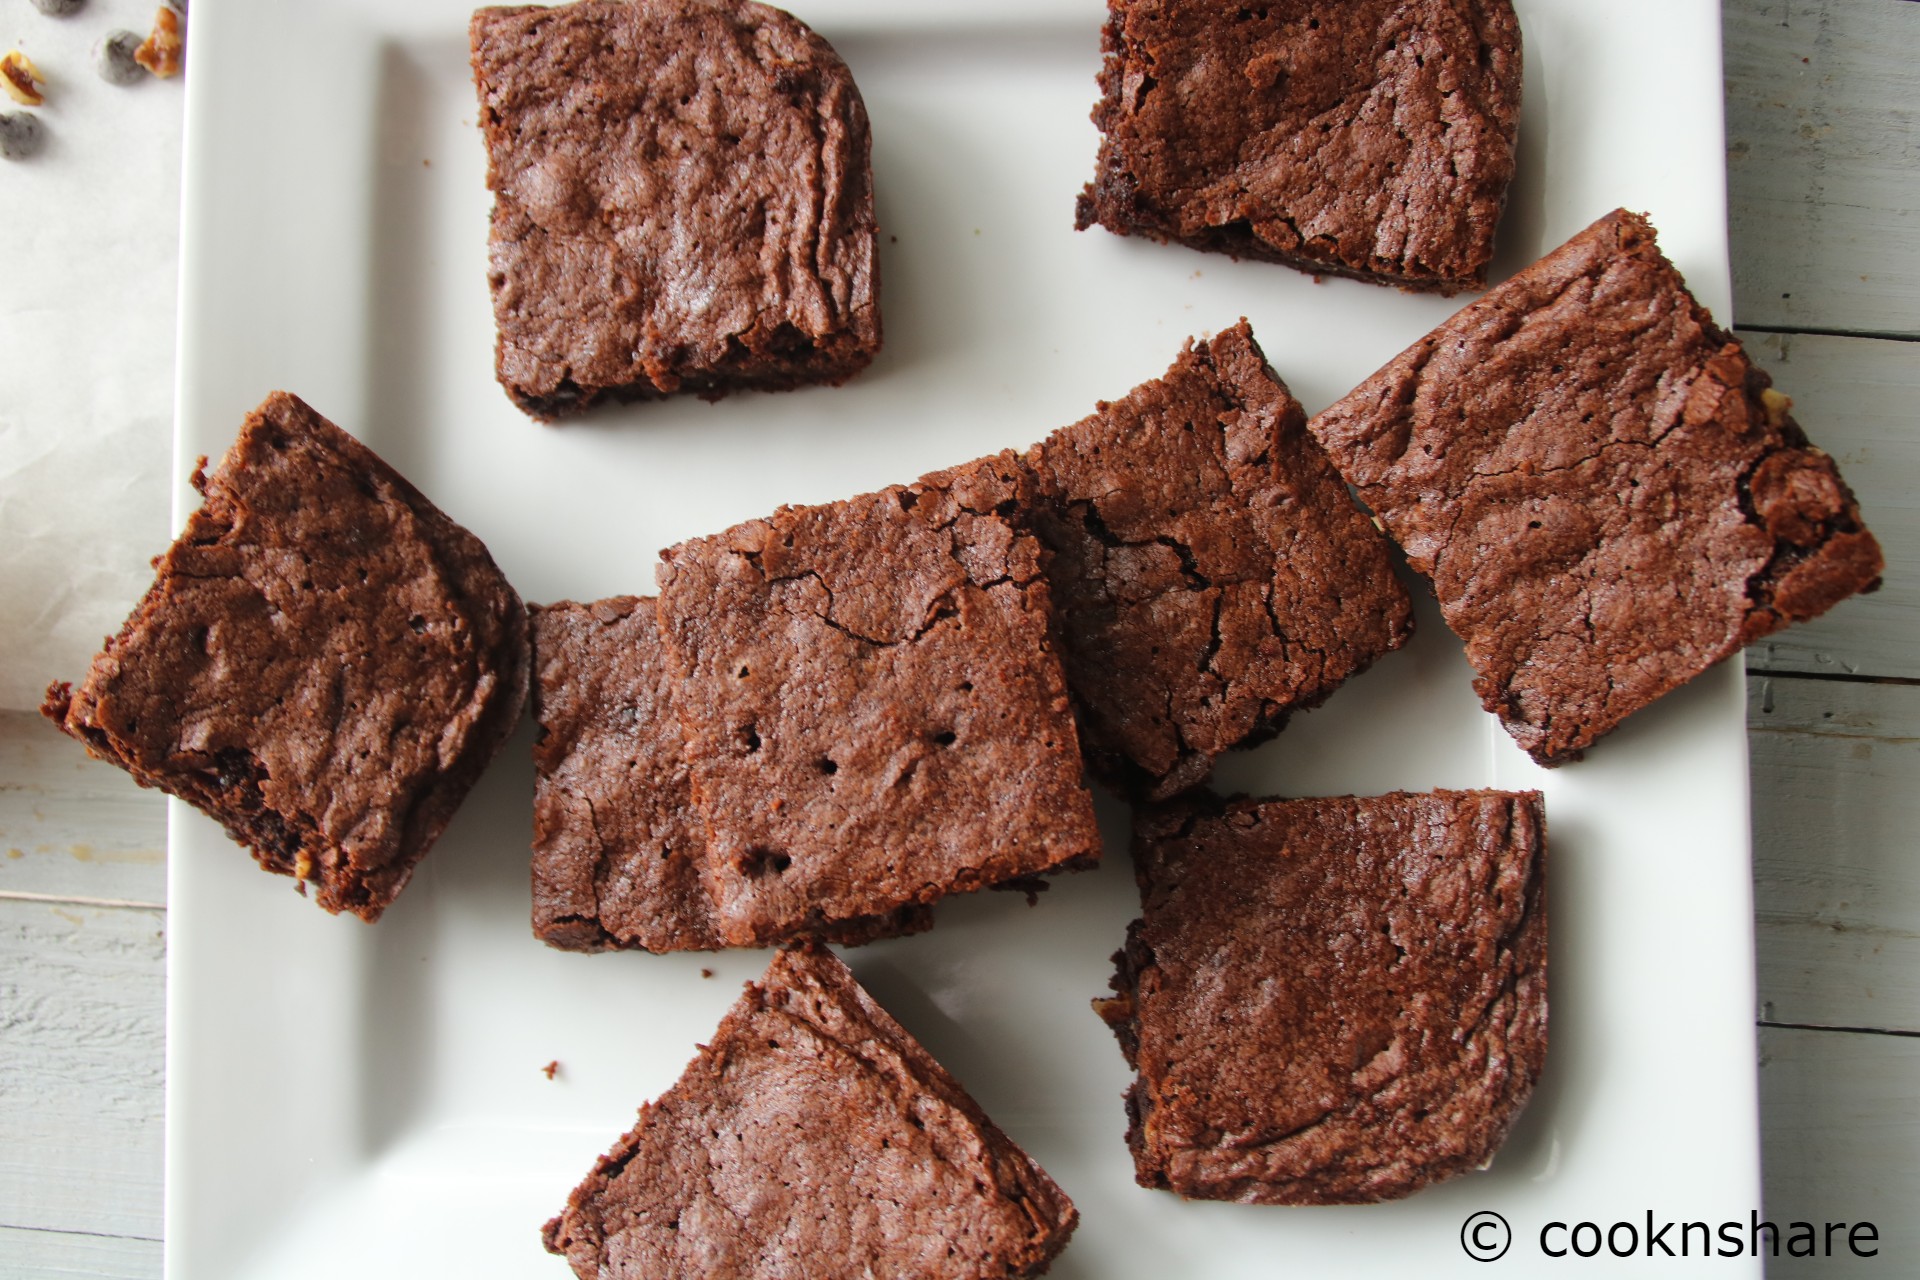 Dave's Triple-Chocolate Brownies - The Great British Bake Off